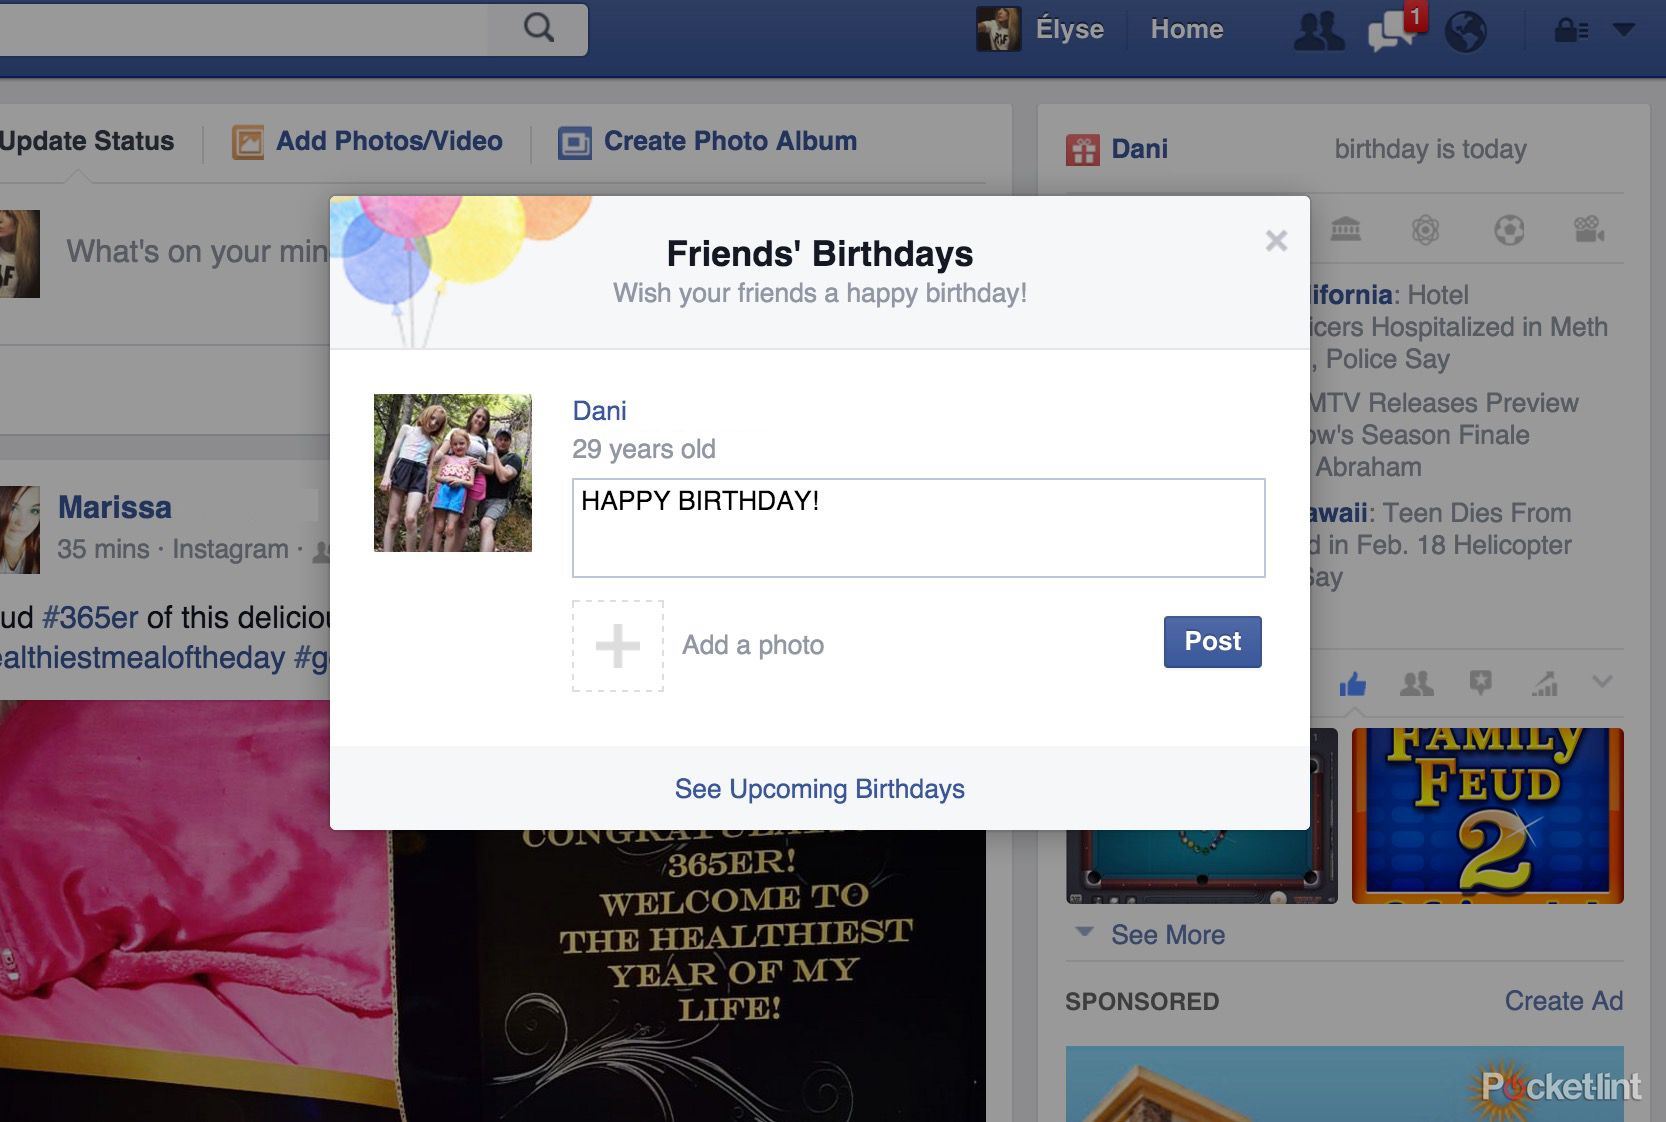 facebook birthday cam lets you say happy birthday to friends via video image 1